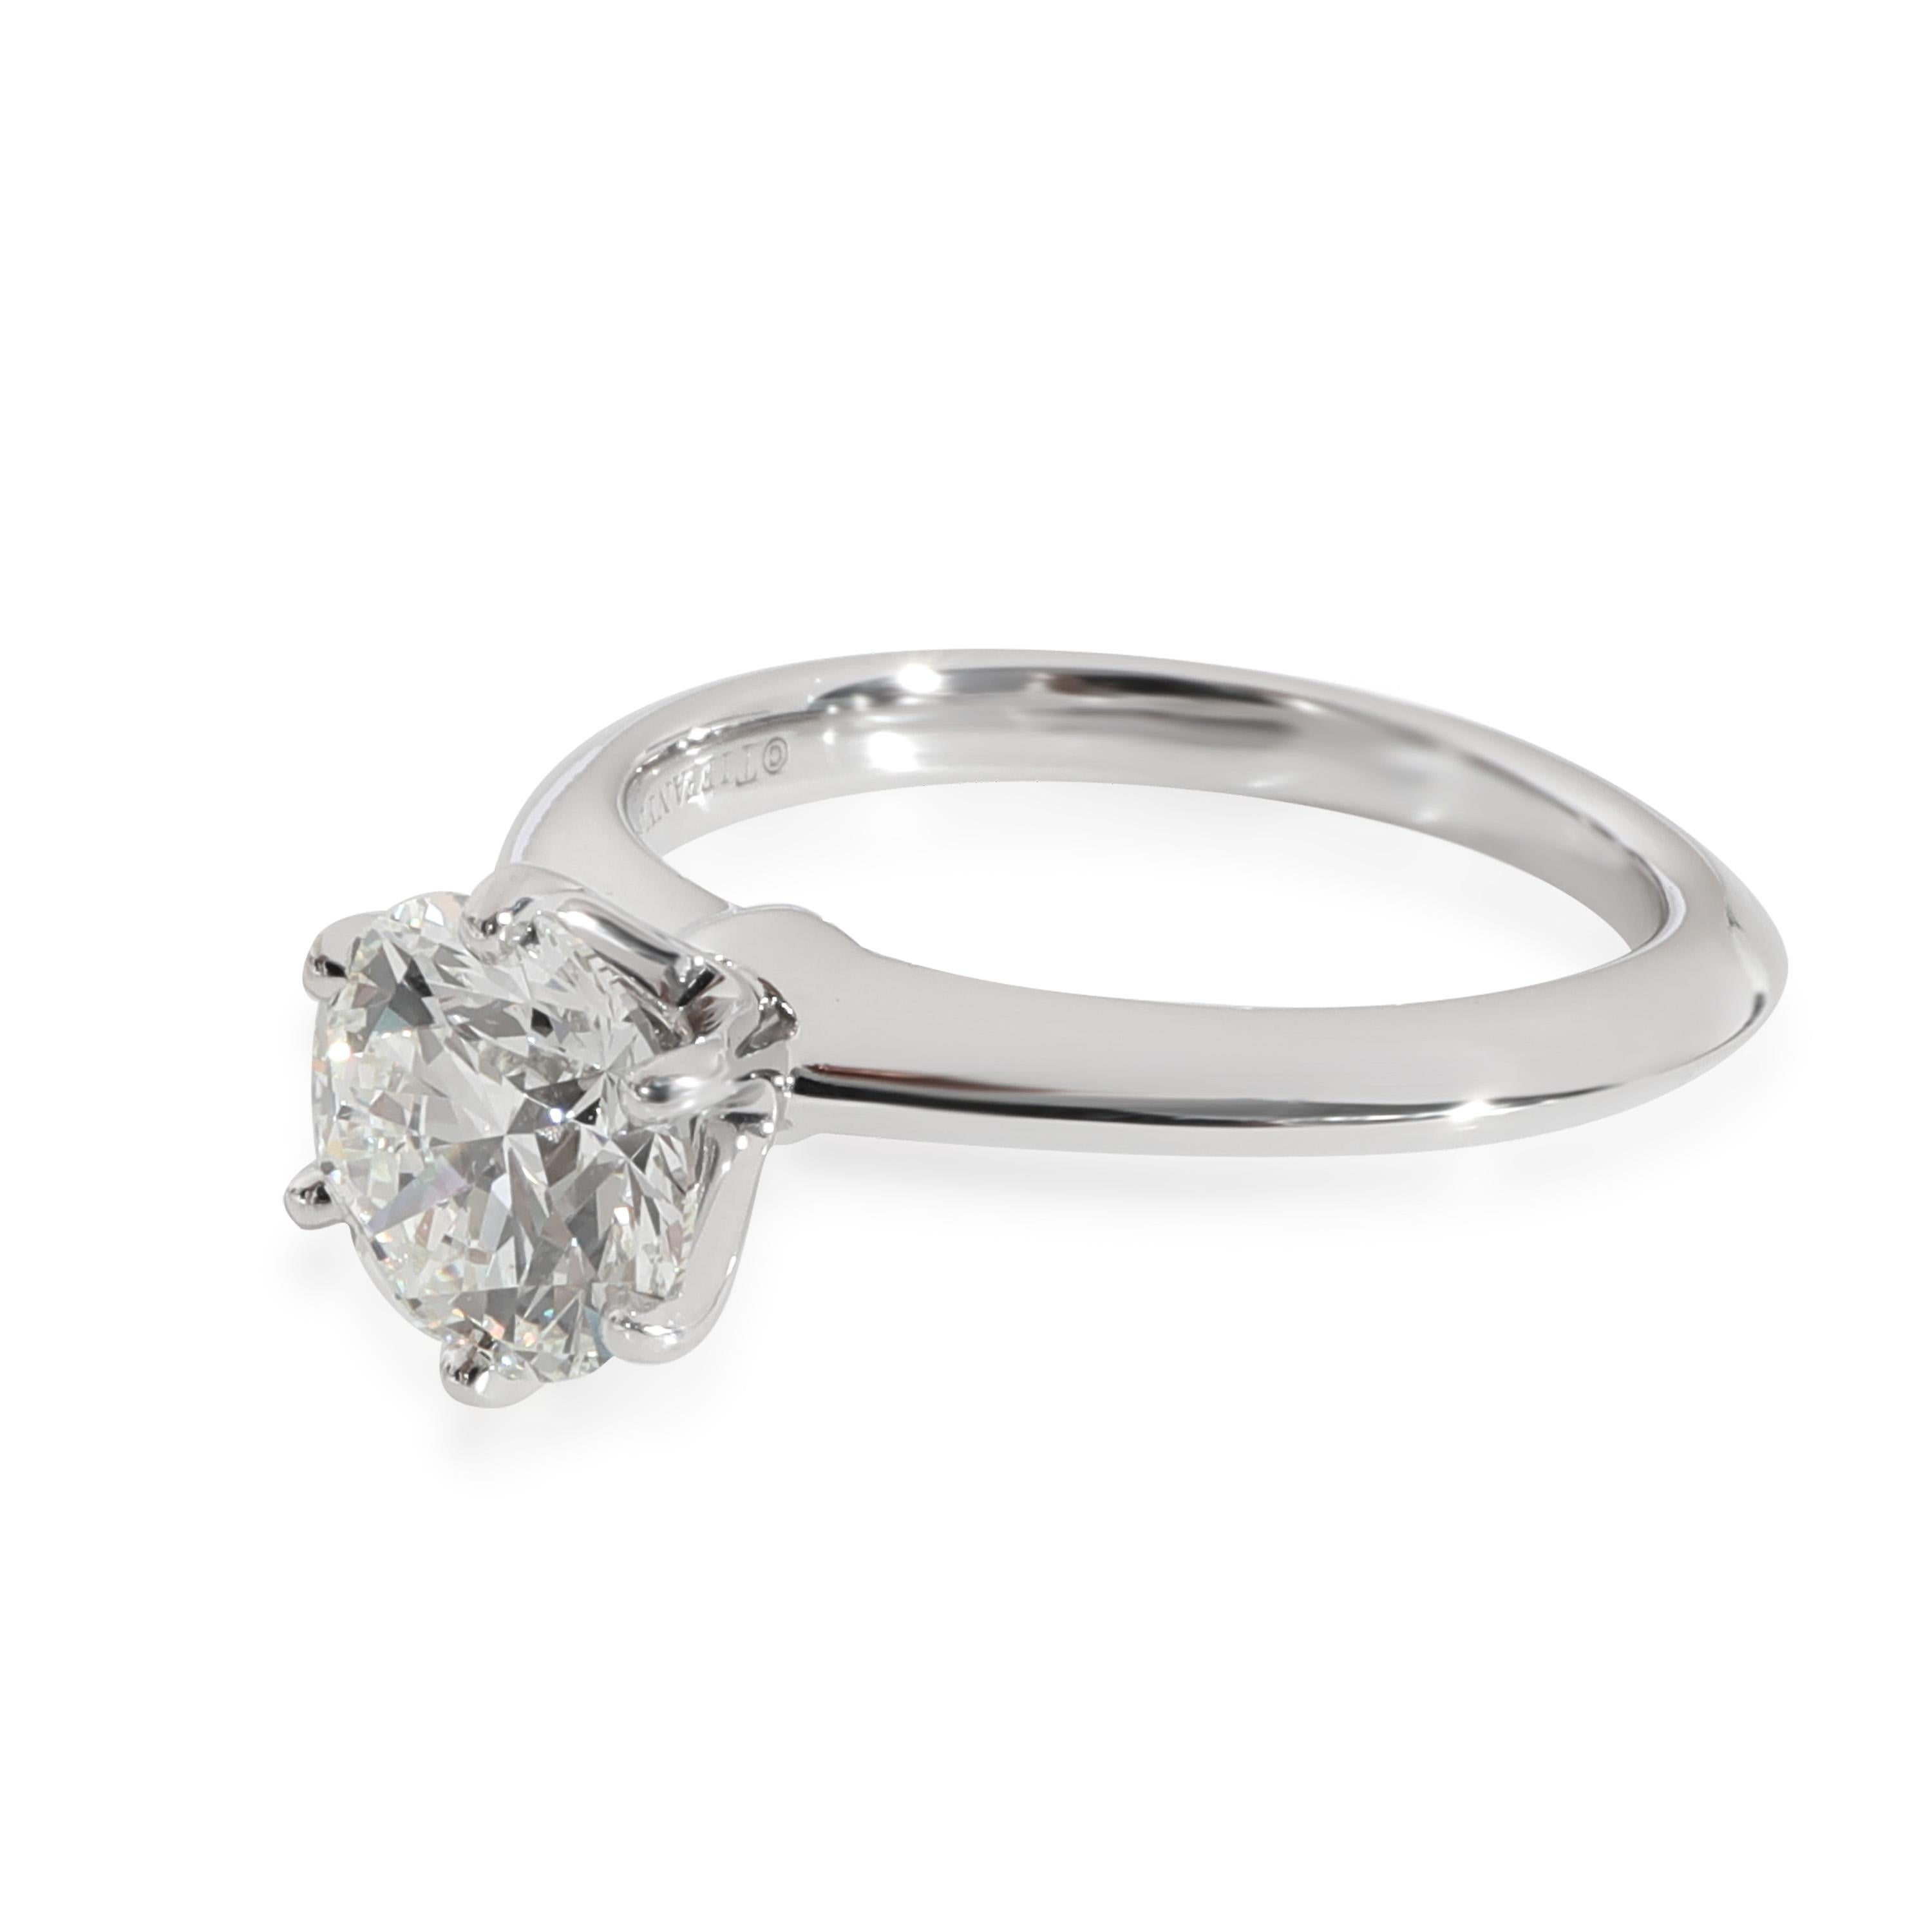 Tiffany & Co. Diamond Engagement Ring in Platinum I VVS2 1.38 CTW In Excellent Condition For Sale In New York, NY